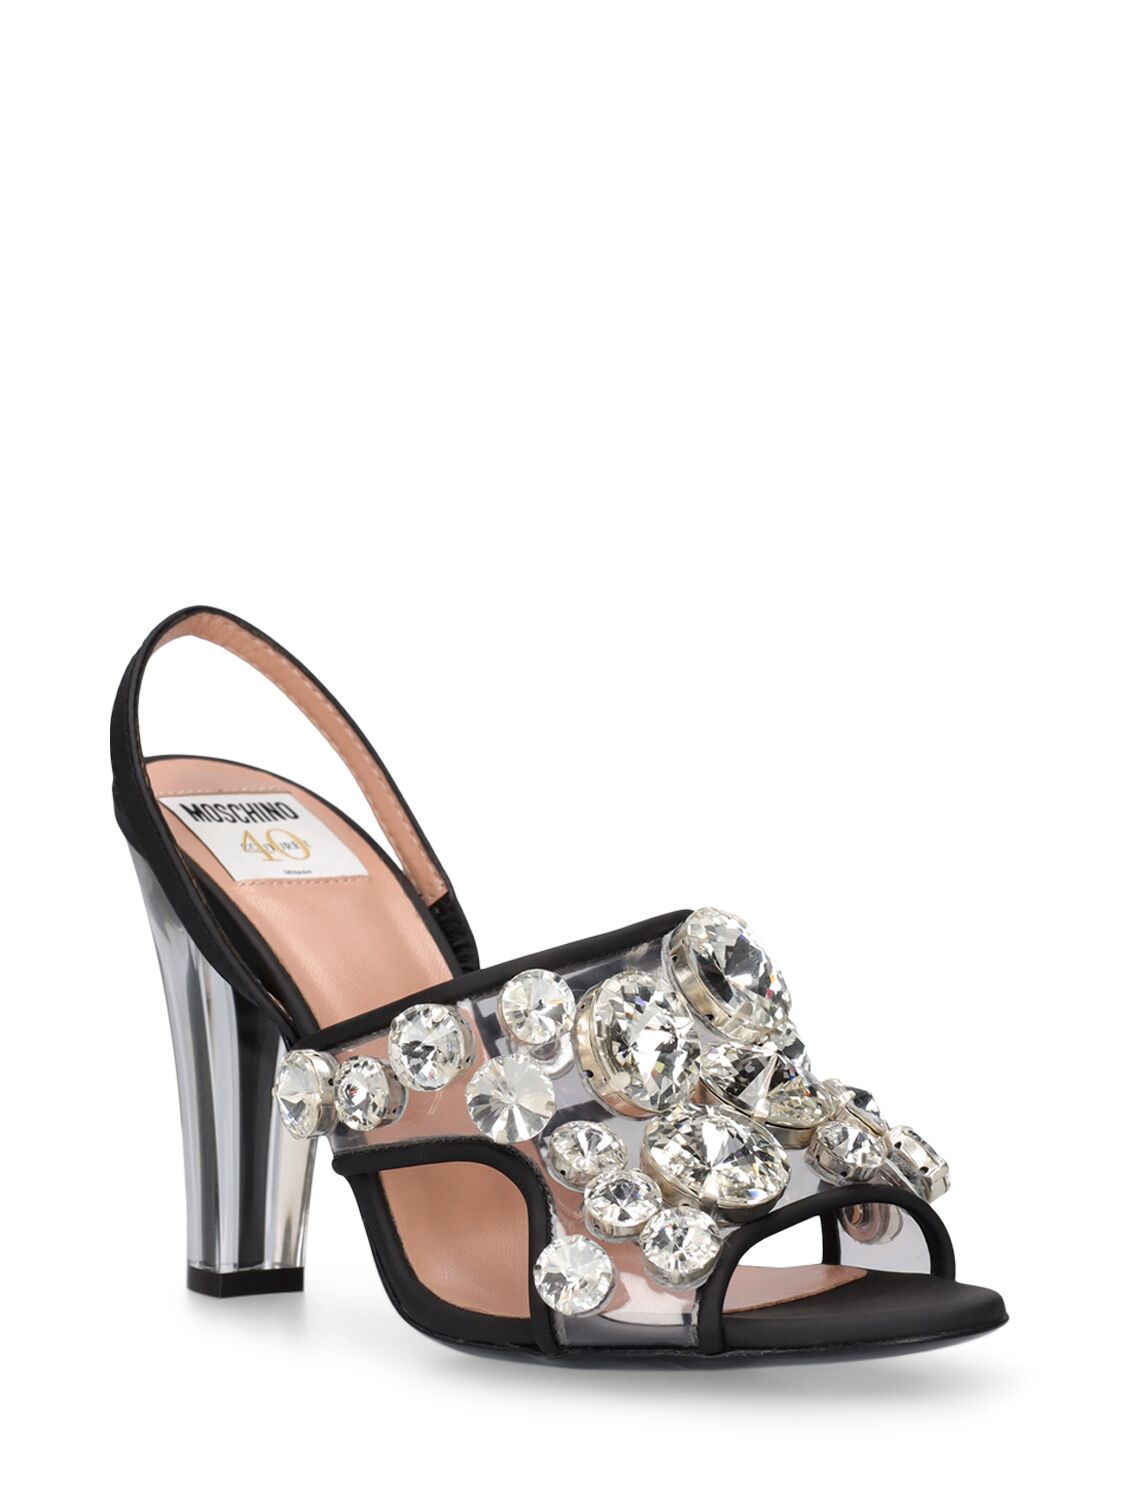 Shop Moschino 100mm Pvc & Crystal Sandals In Black